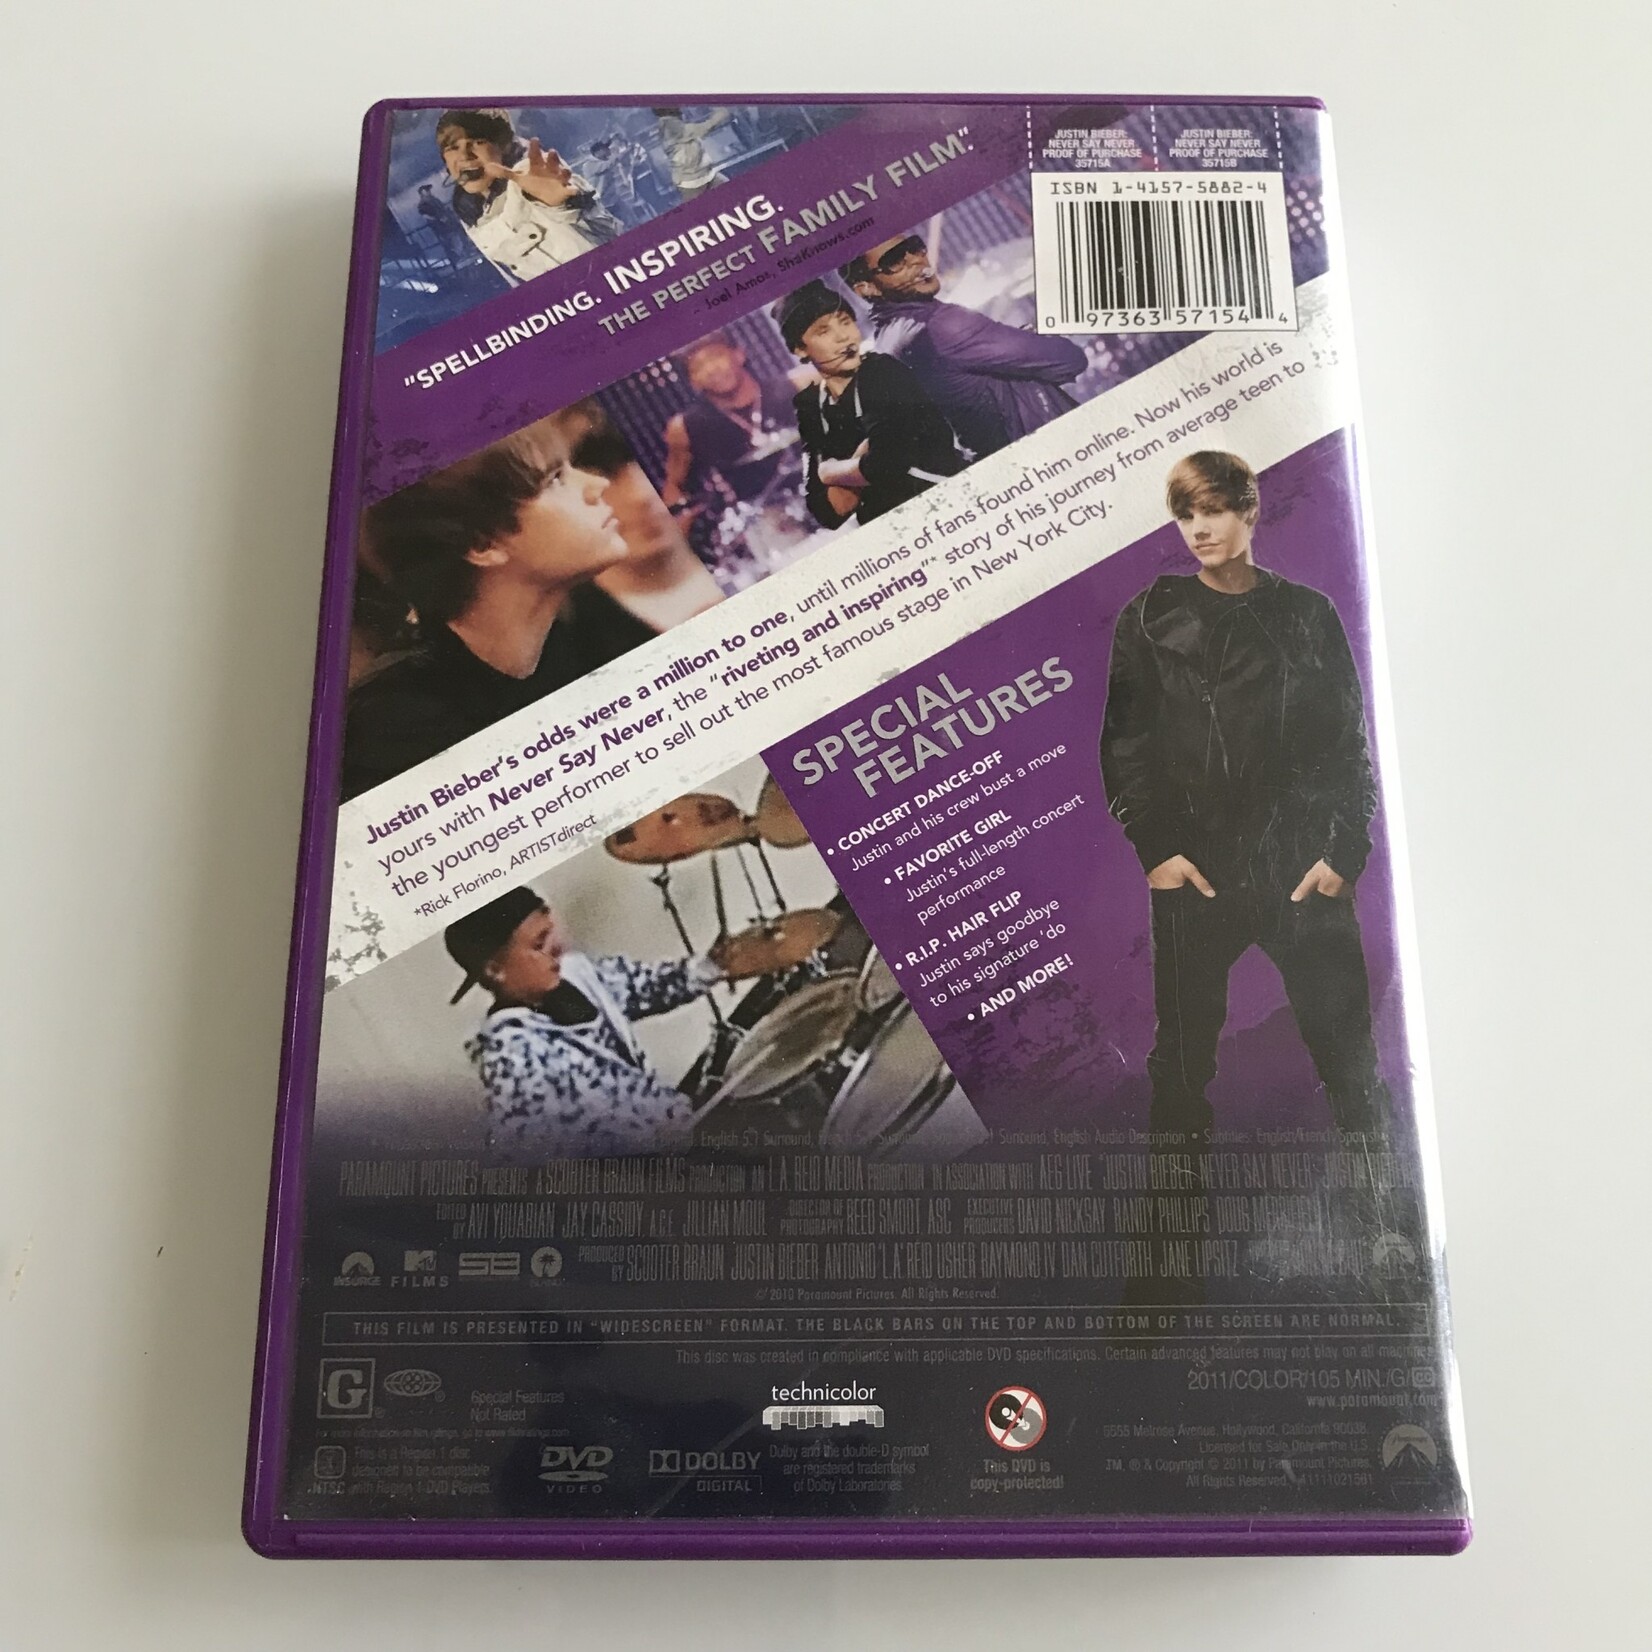 Justin Bieber - Never Say Never - DVD (USED)